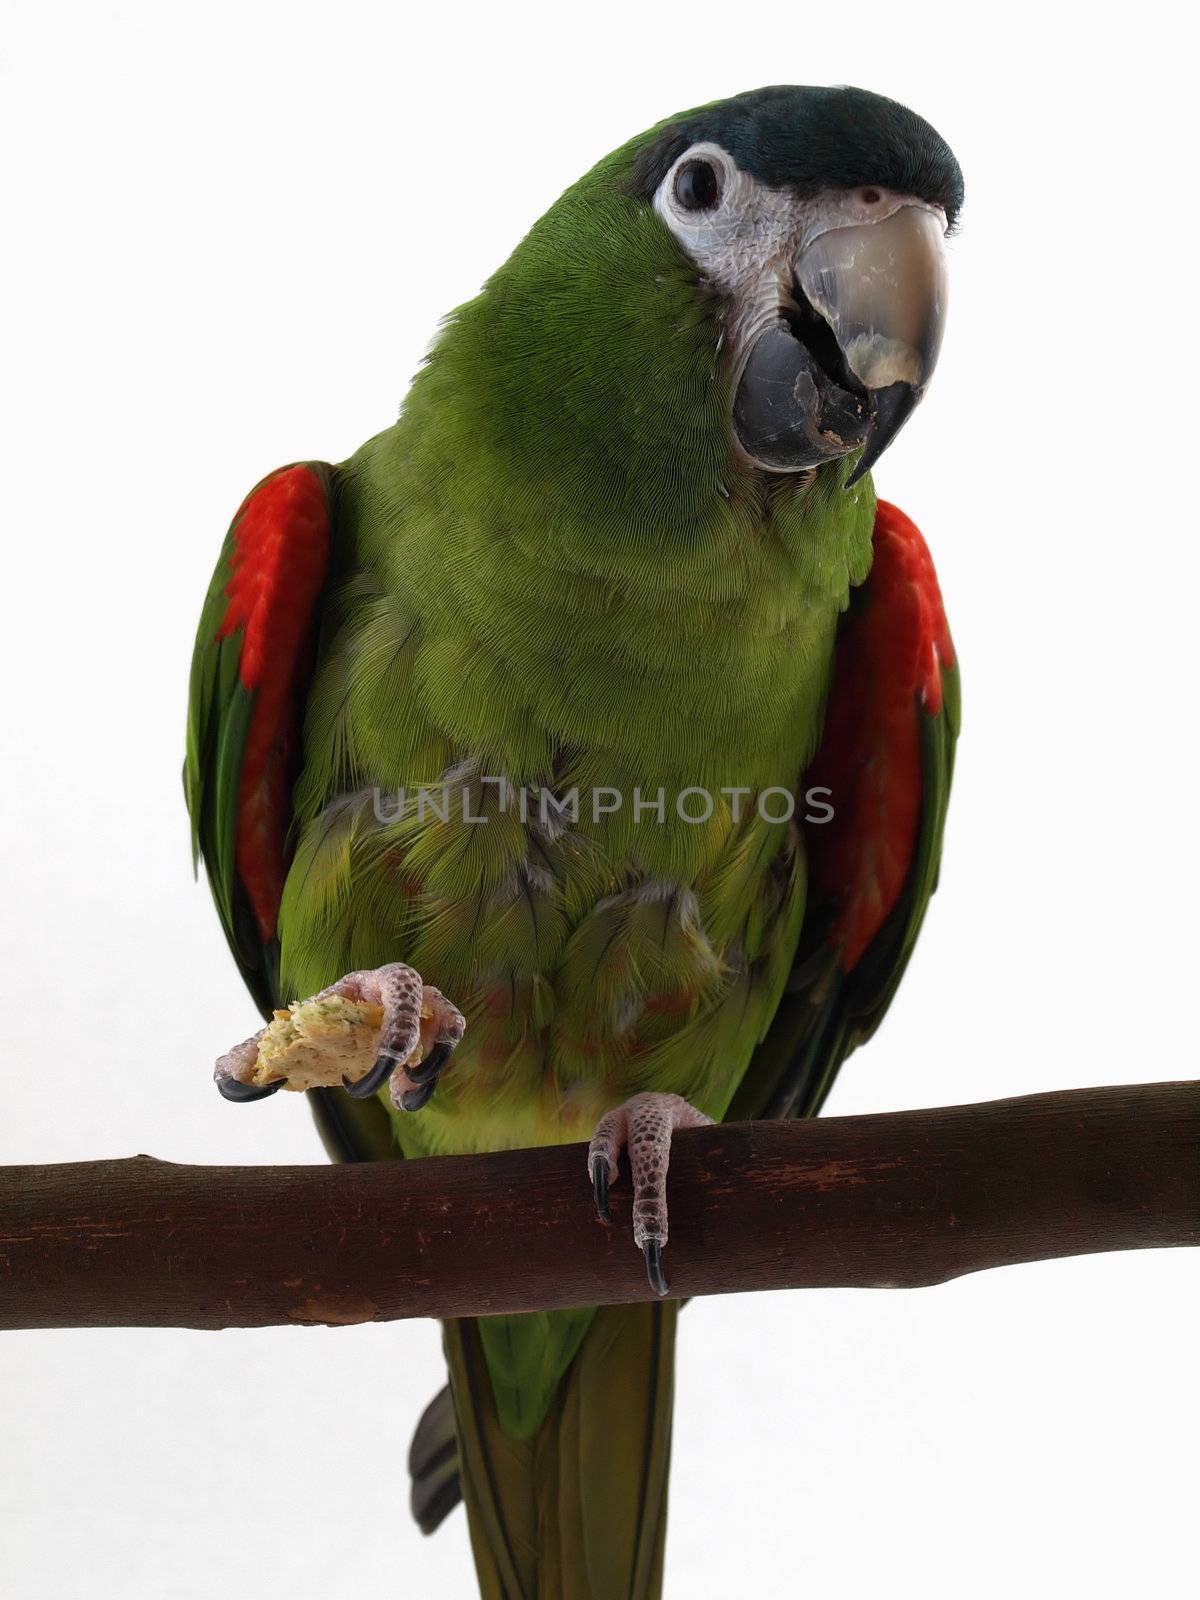 Miniature Noble Macaw with Cracker by RGebbiePhoto